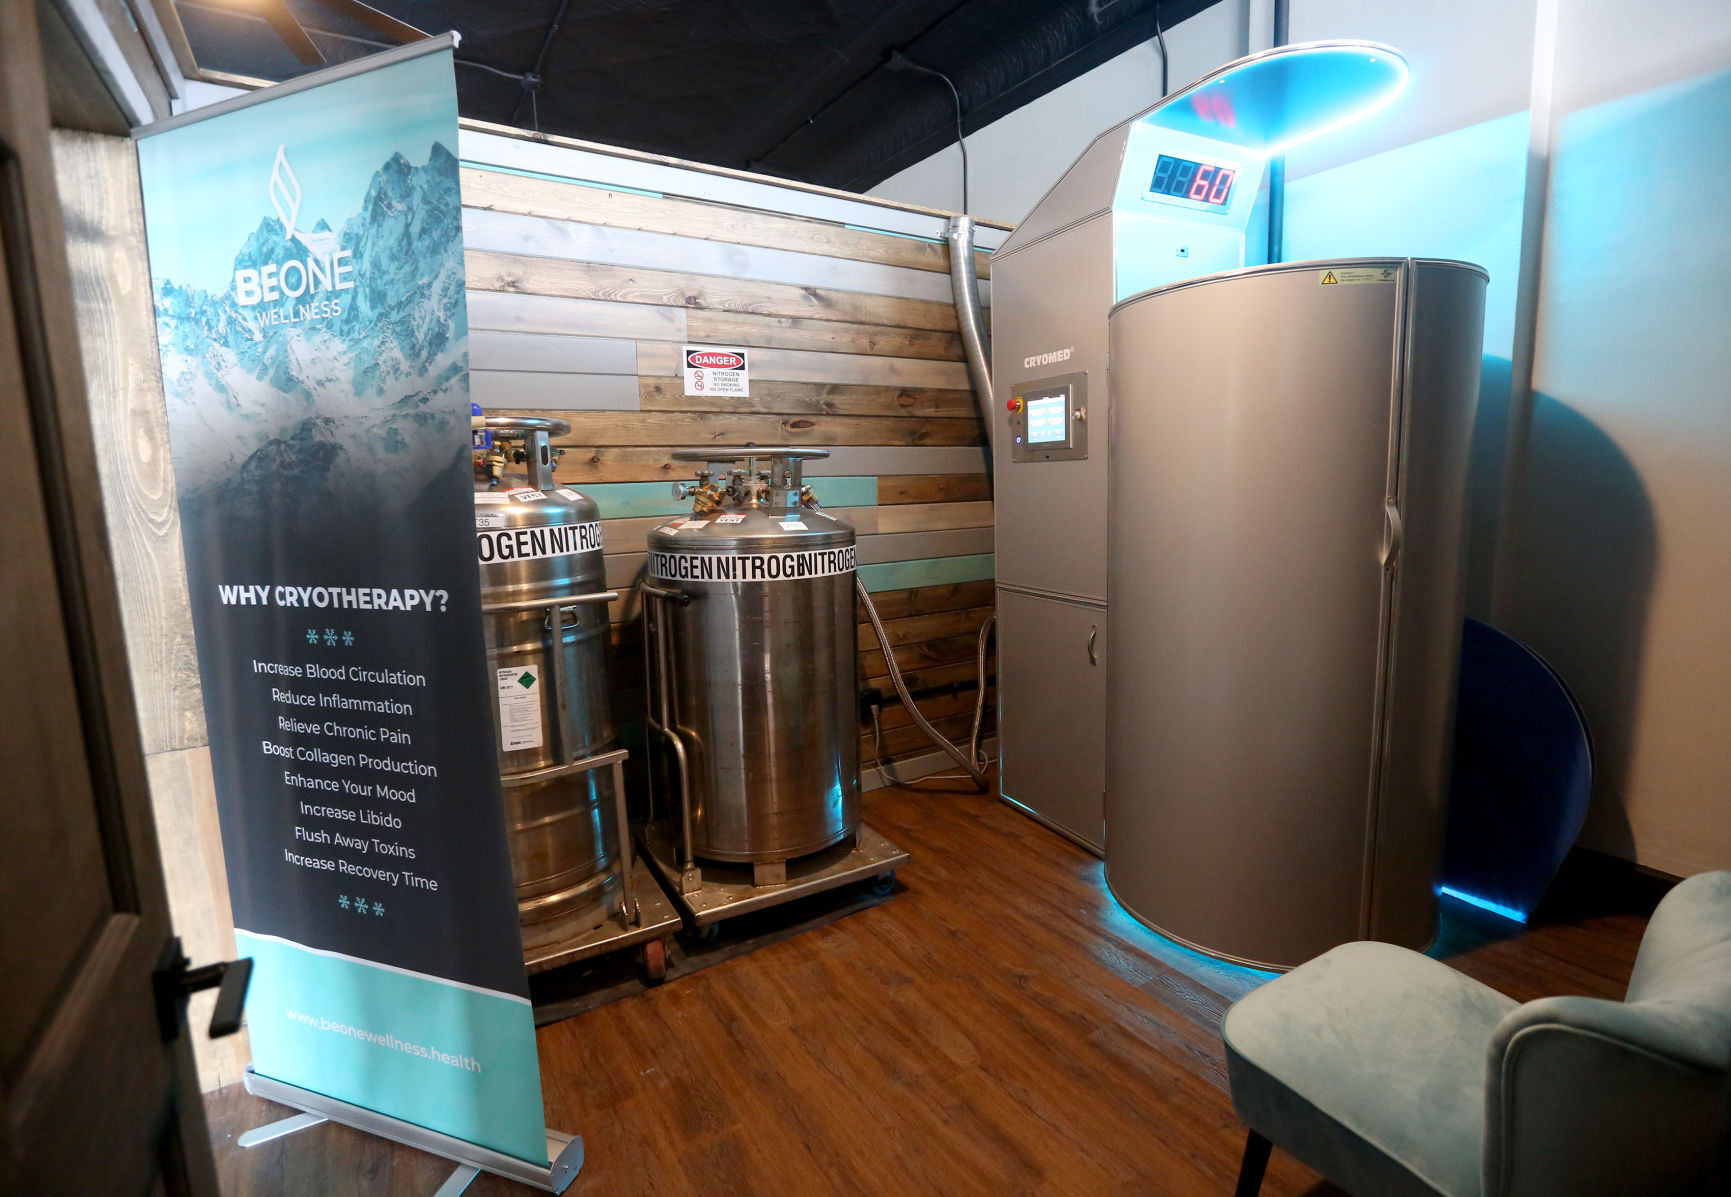 A cryotherapy room at Be One Wellness in Dubuque. PHOTO CREDIT: JESSICA REILLY